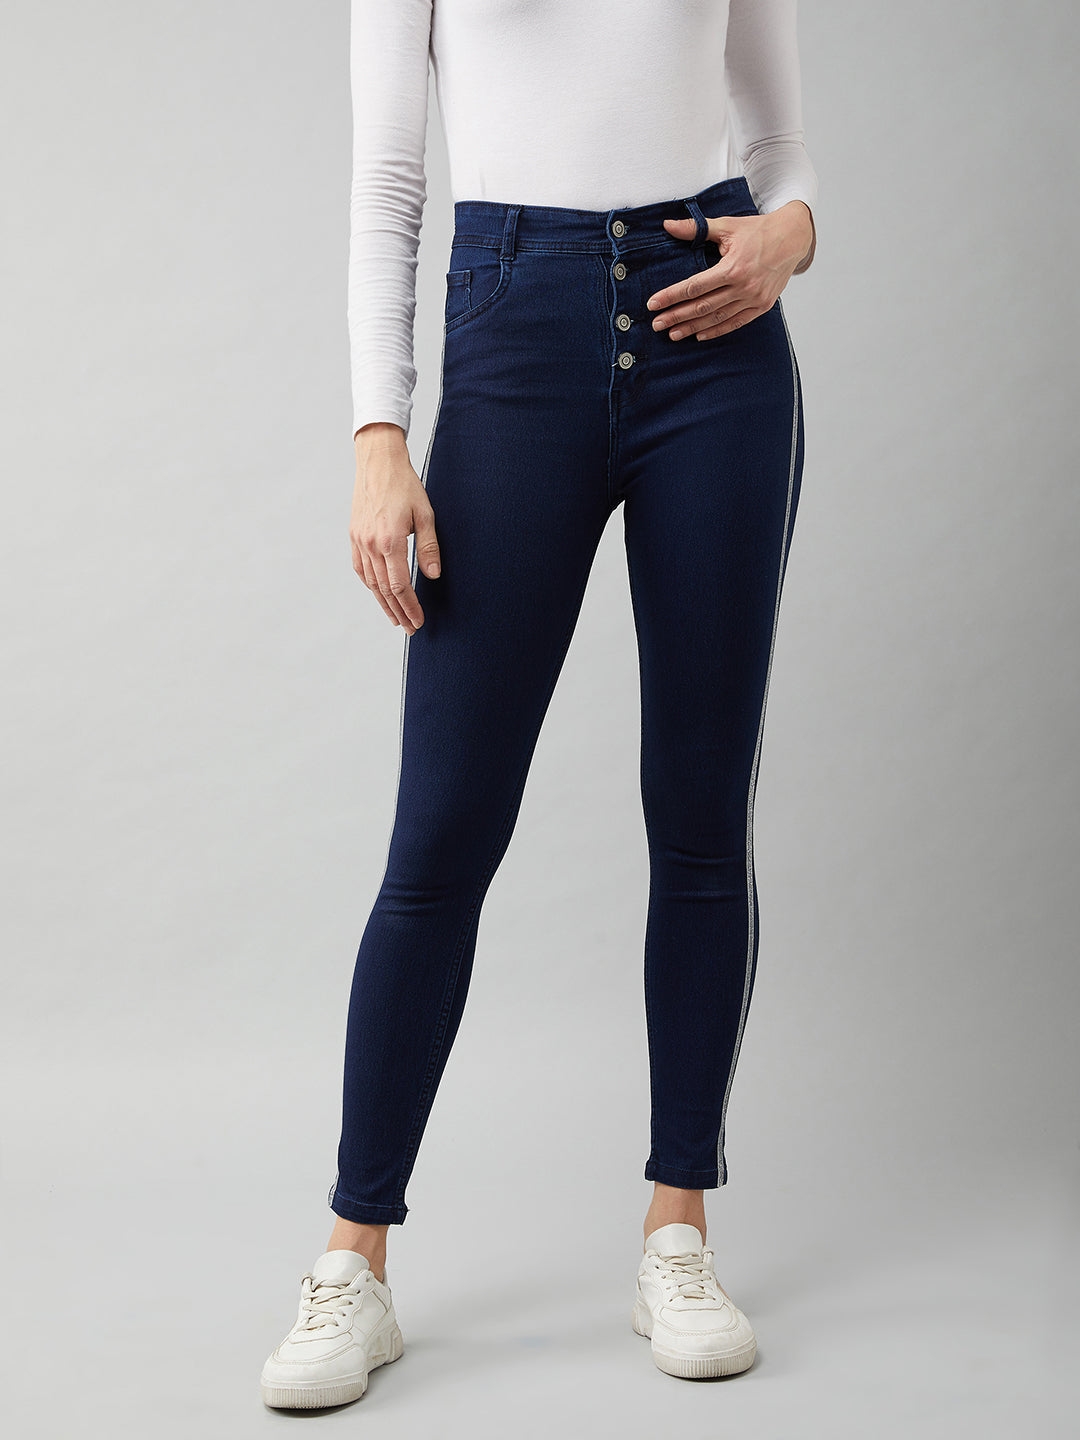 Navy Blue Cotton Skinny Fit Relaxed High Rise Regular Length Stretchable Denim Jeans